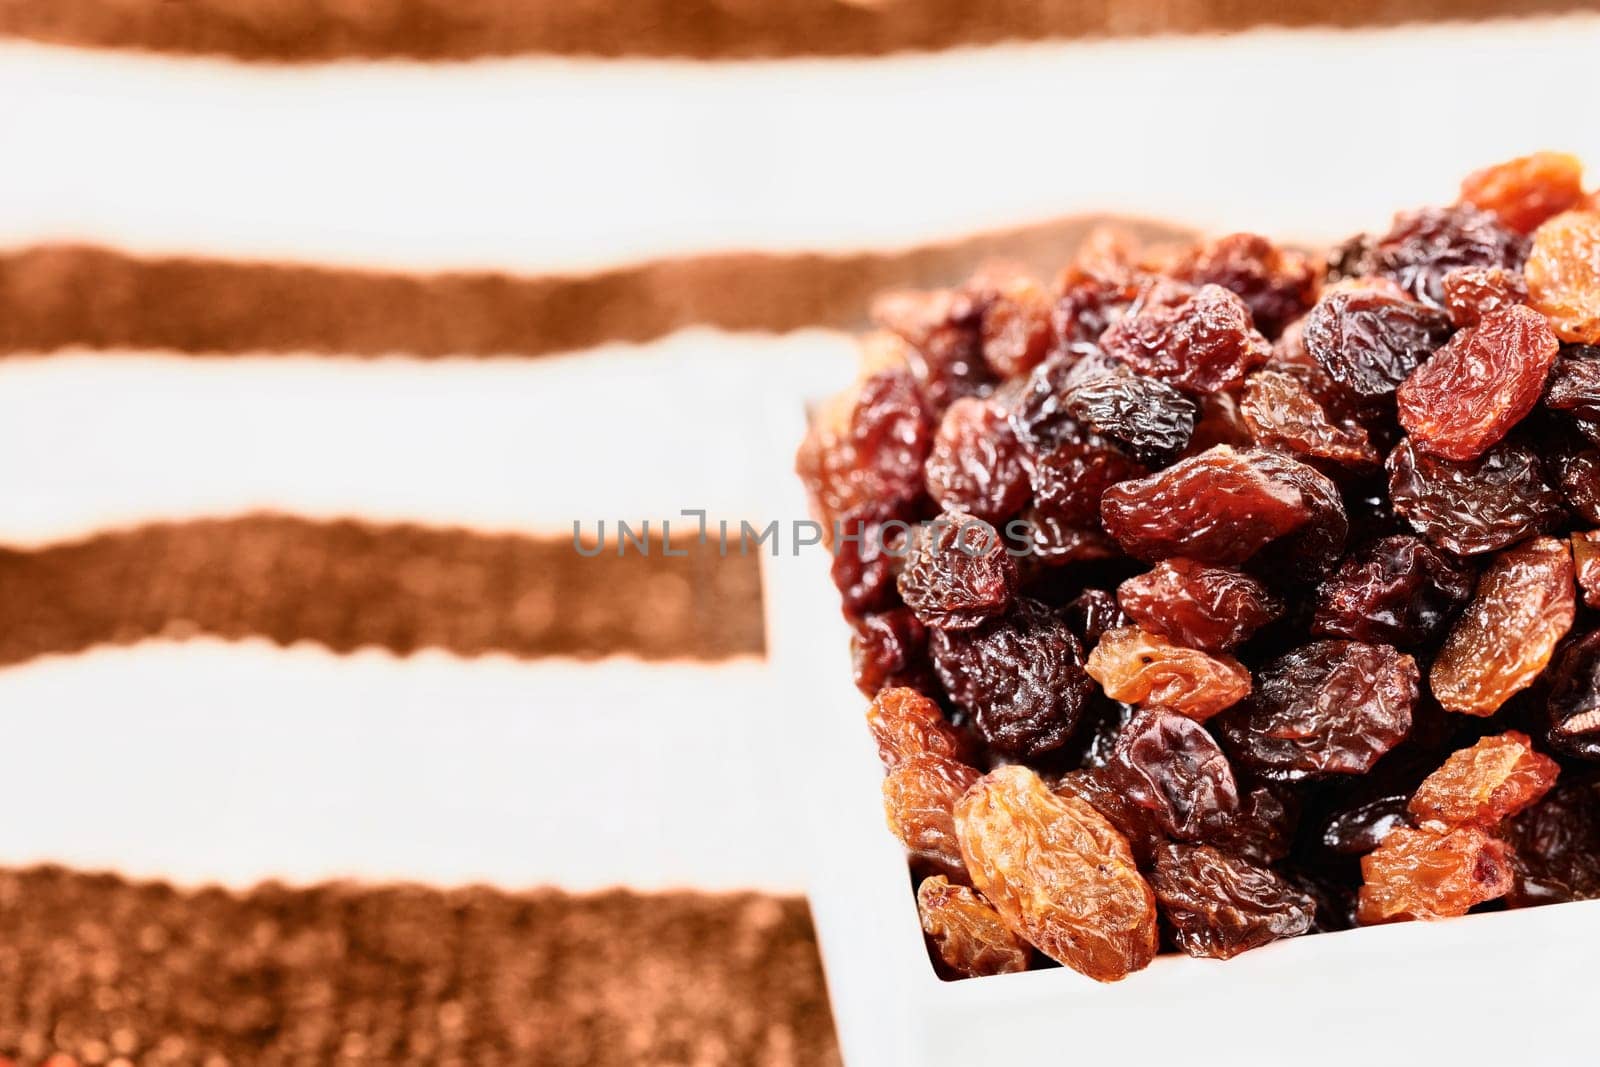 Bunch of dried grapes , raisins by victimewalker